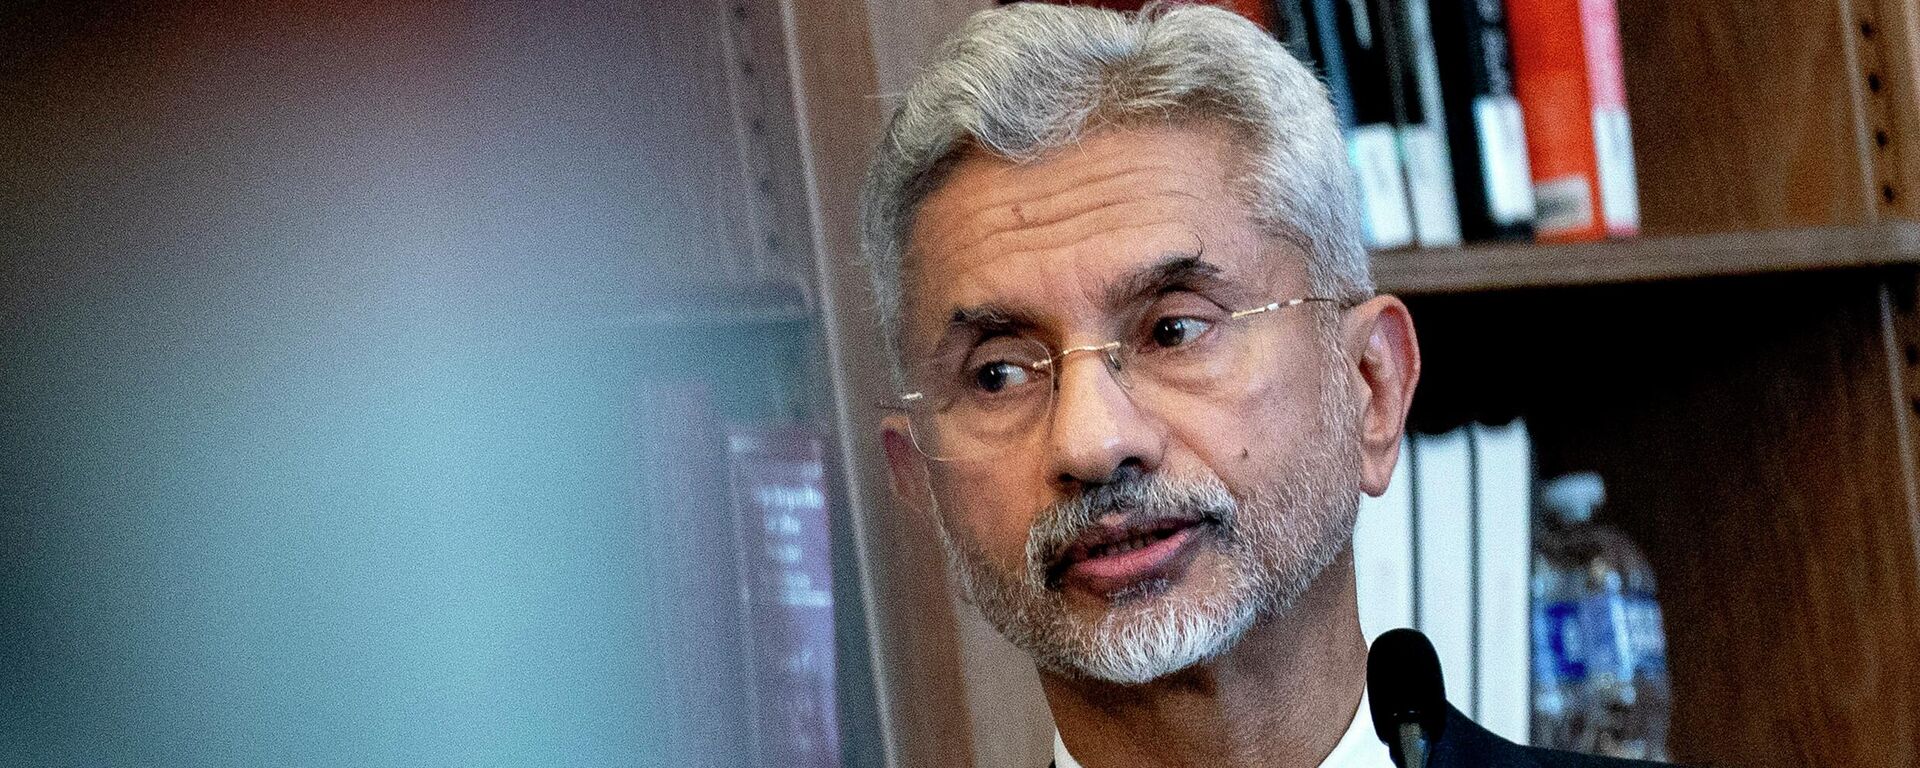 Indian External Affairs Minister Dr. S. Jaishankar speaks as he and Secretary of State Antony Blinken host a US-India higher education dialogue at the Howard University Founders Library in Washington, Tuesday, April 12, 2022. - Sputnik International, 1920, 05.09.2022